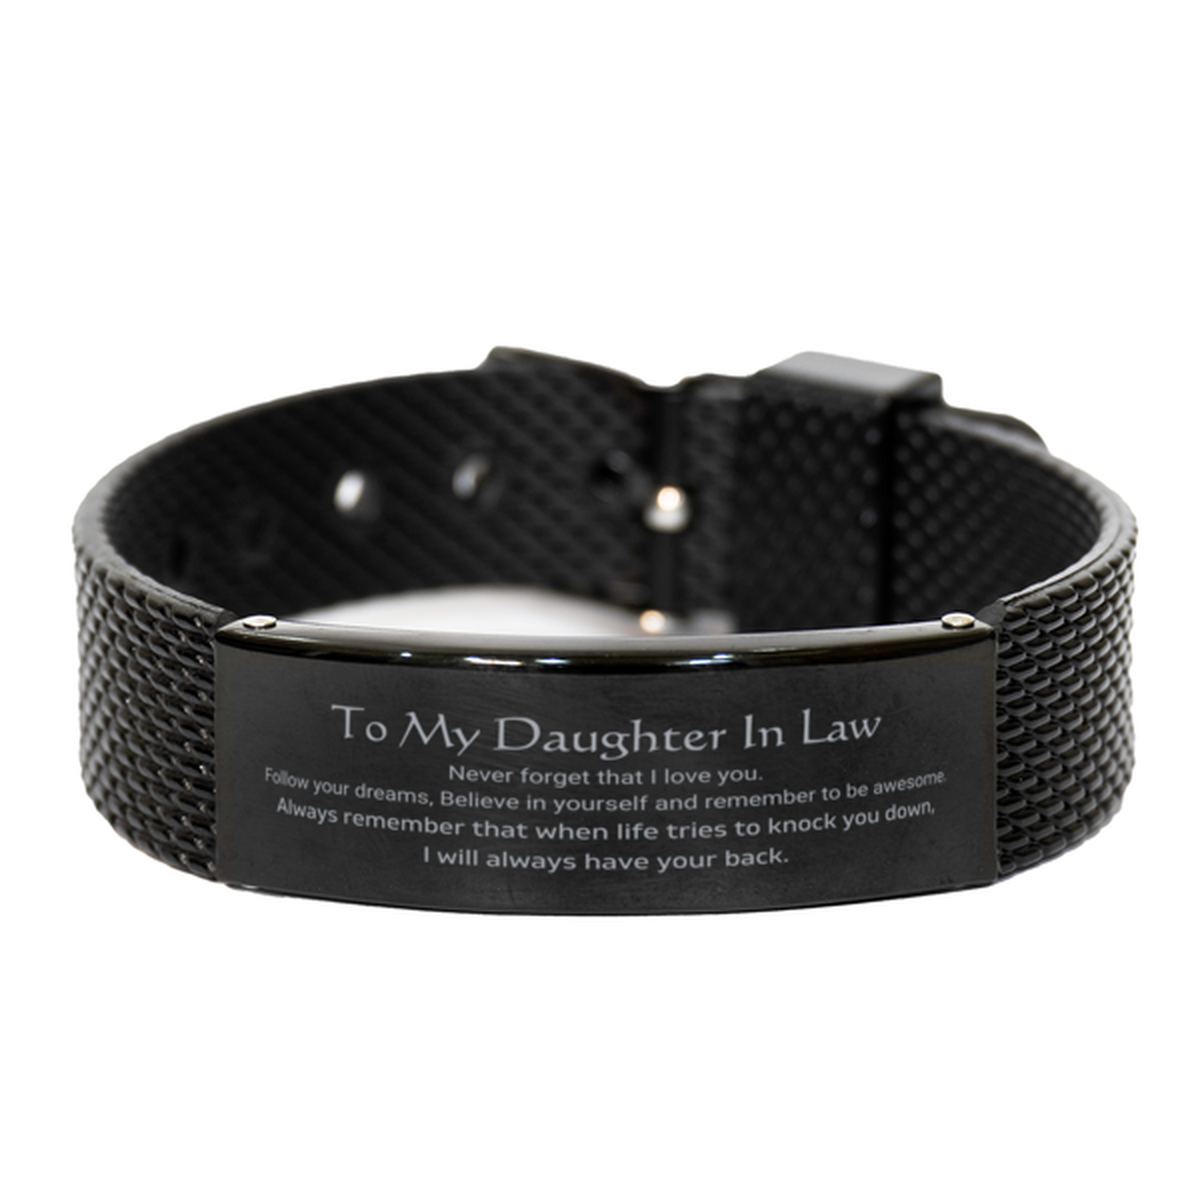 Inspirational Gifts for Daughter In Law, Follow your dreams, Believe in yourself, Daughter In Law Black Shark Mesh Bracelet, Birthday Christmas Unique Gifts For Daughter In Law